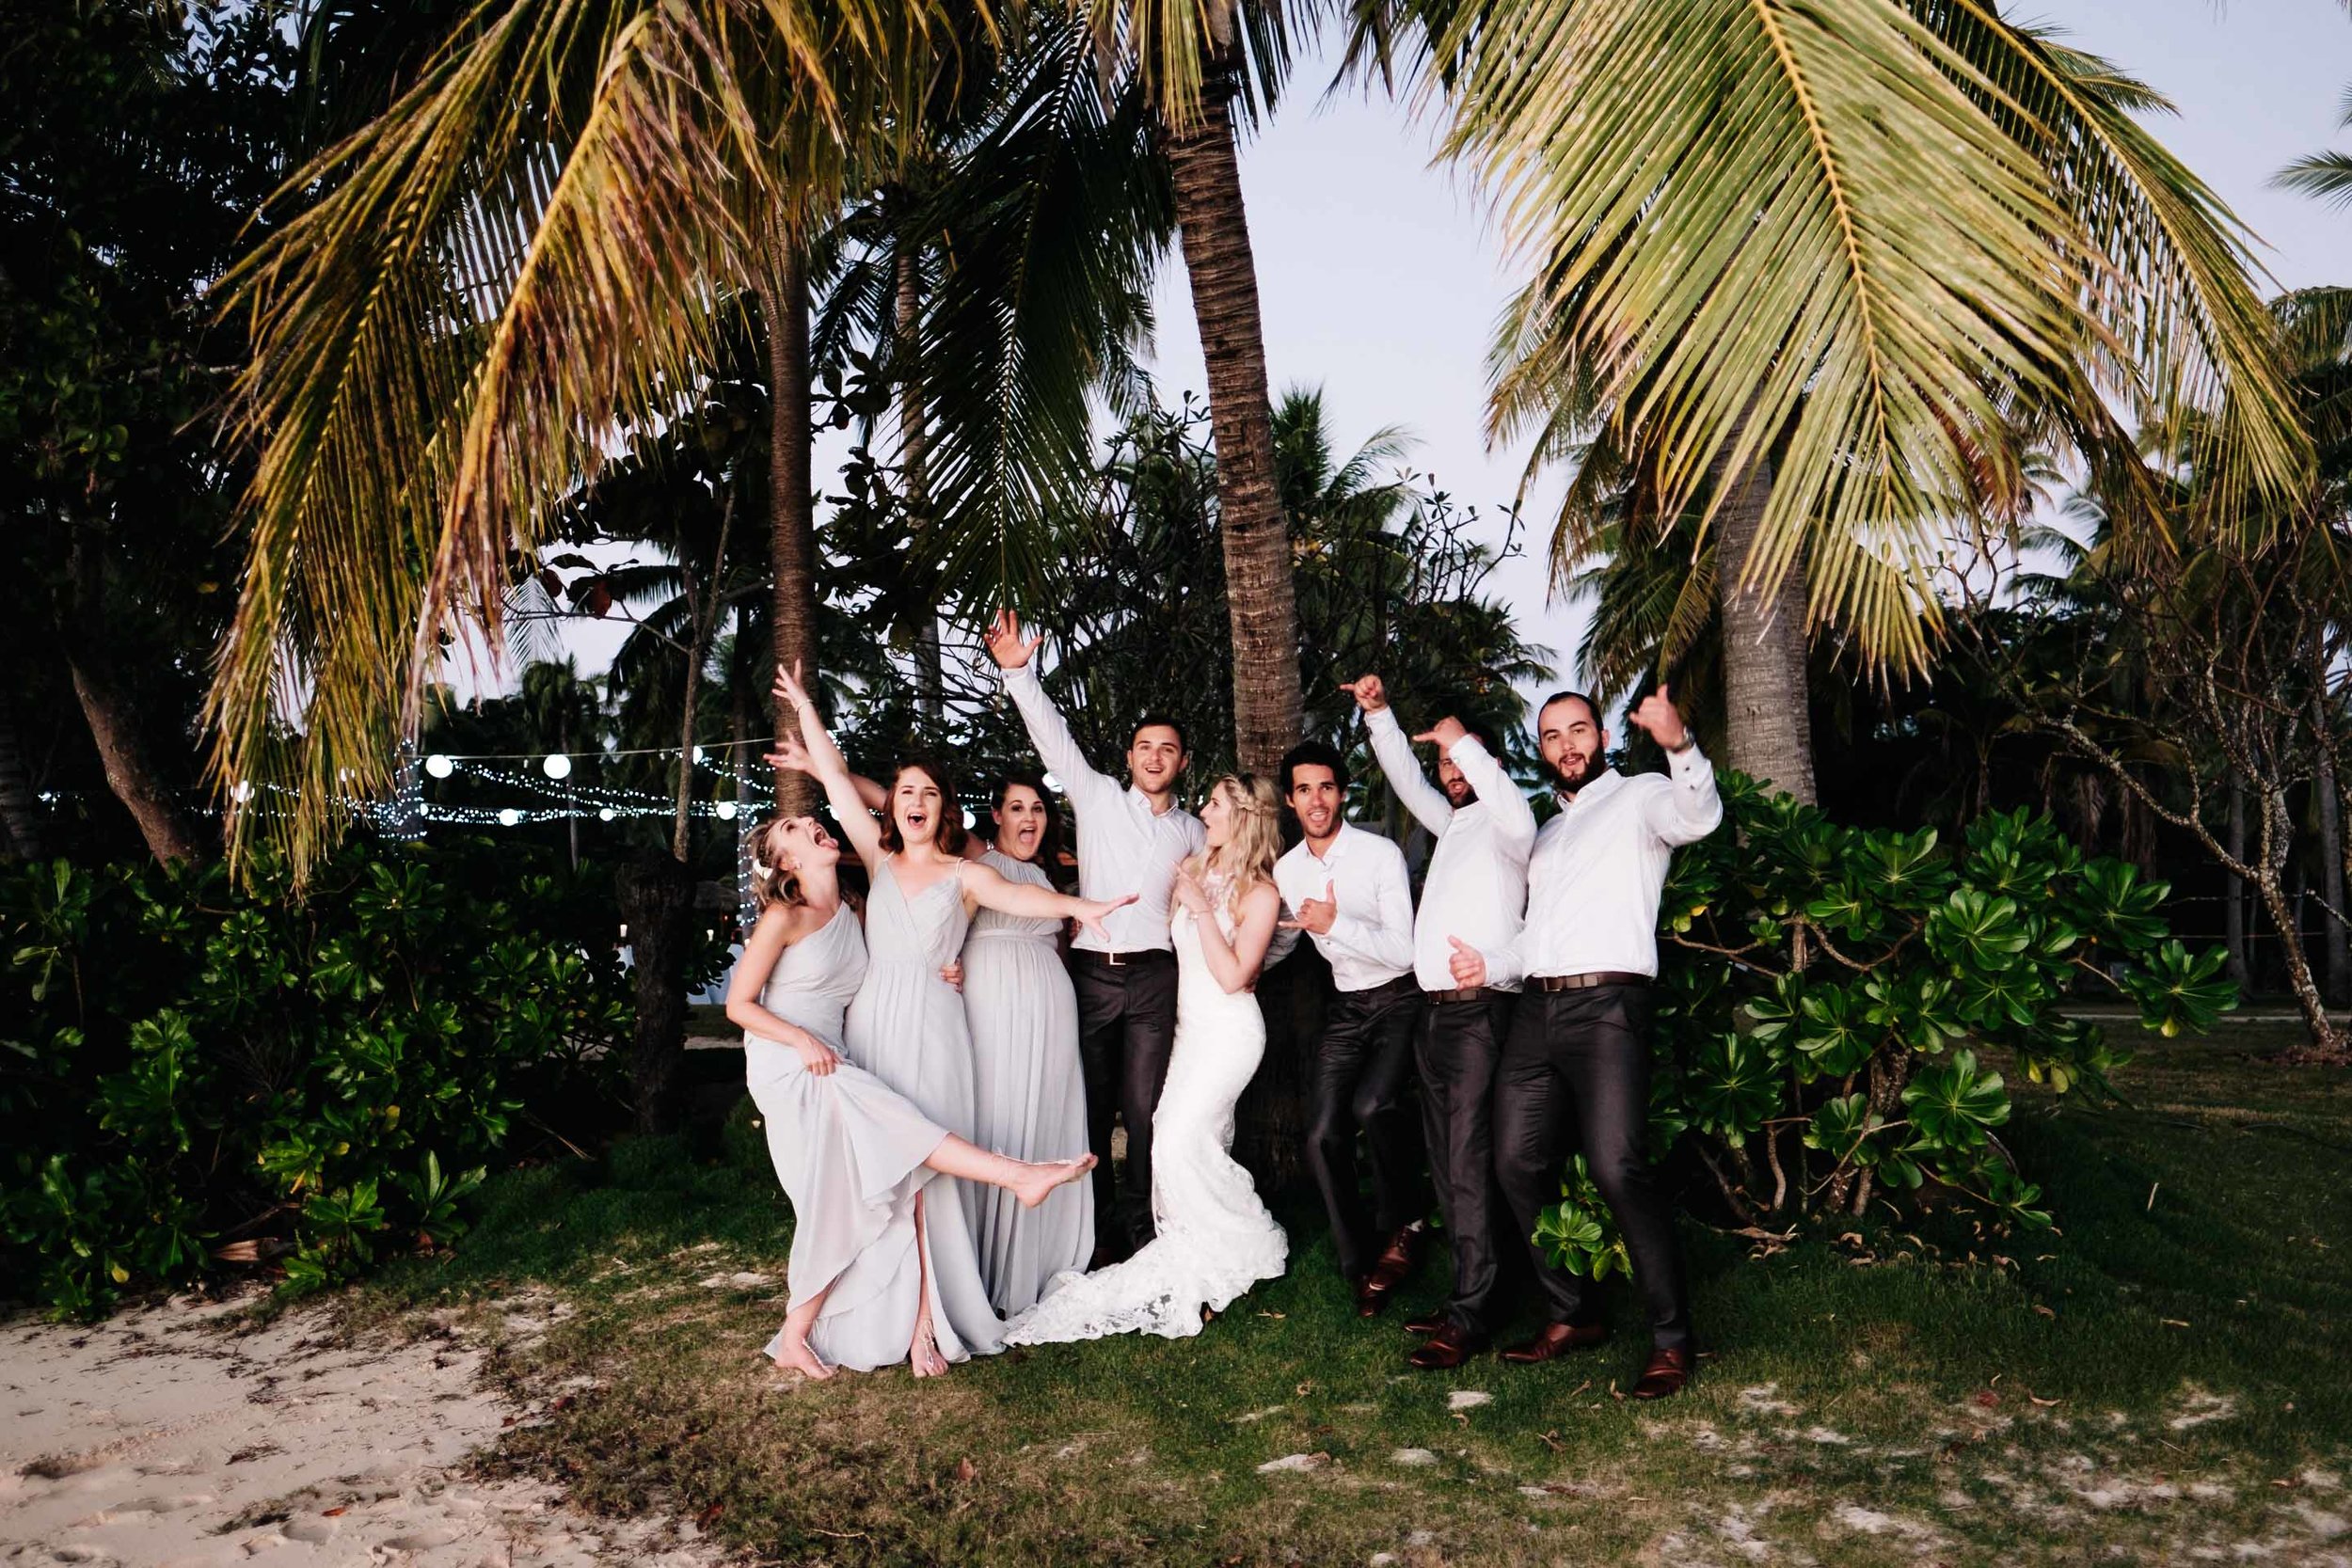 the bridal party having a light moment under a coconut tree next to the beach